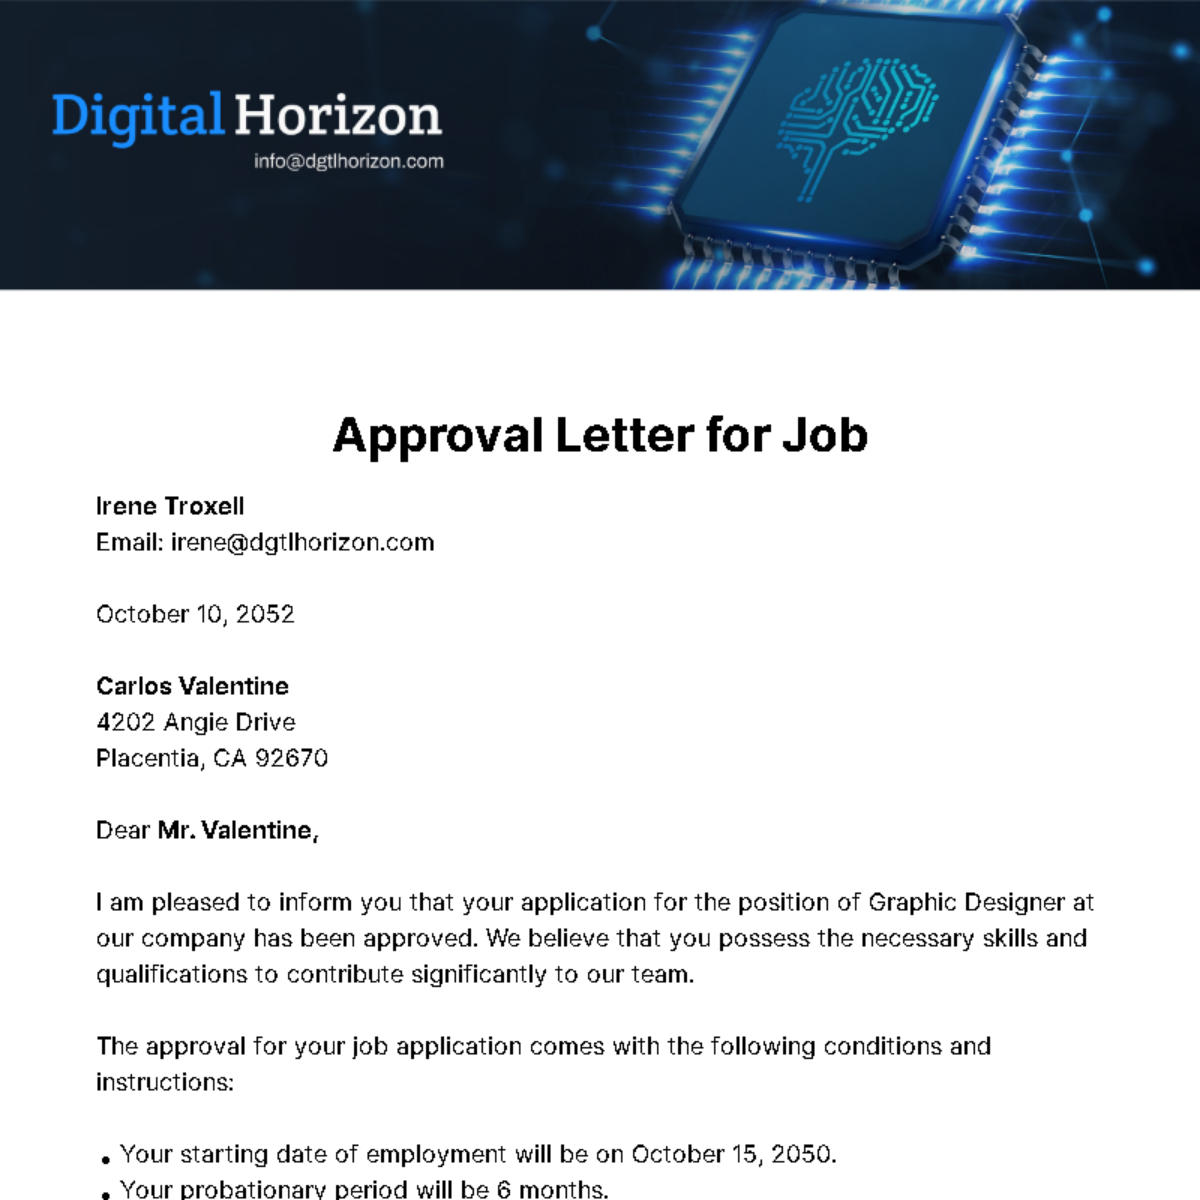 Approval Letter for Job  Template